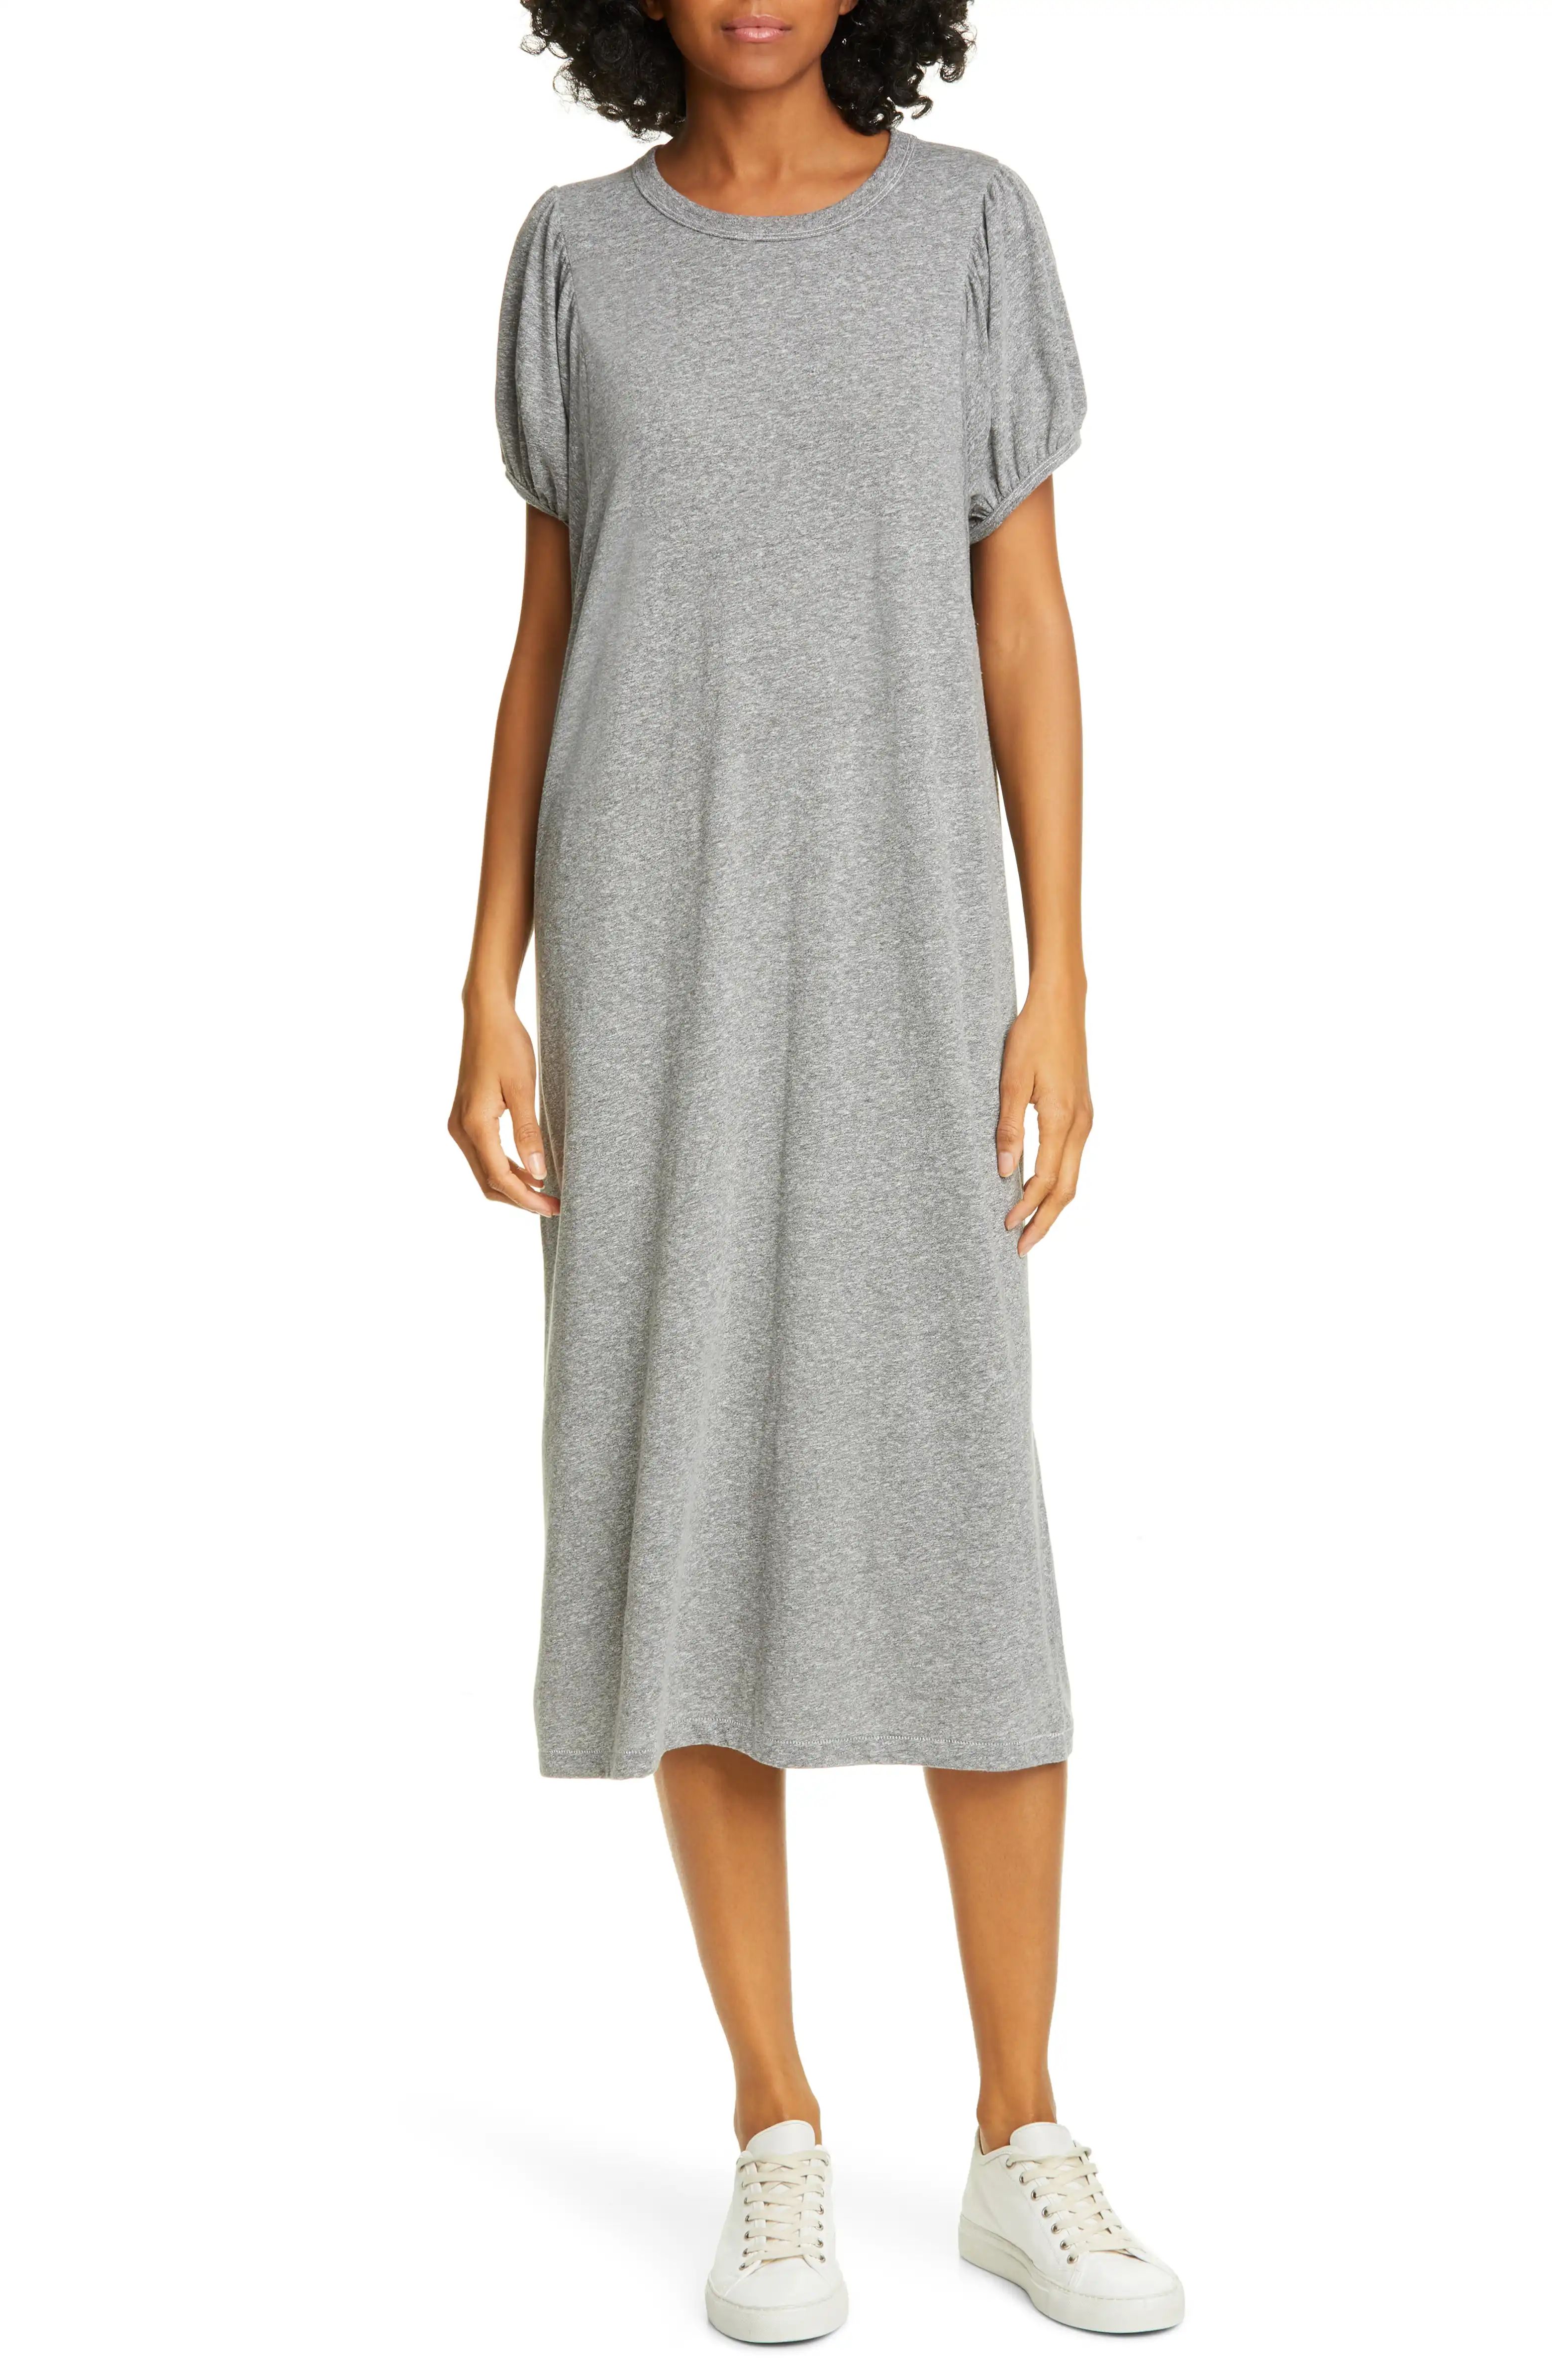 The Puff Sleeve DressTHE GREAT. | Nordstrom